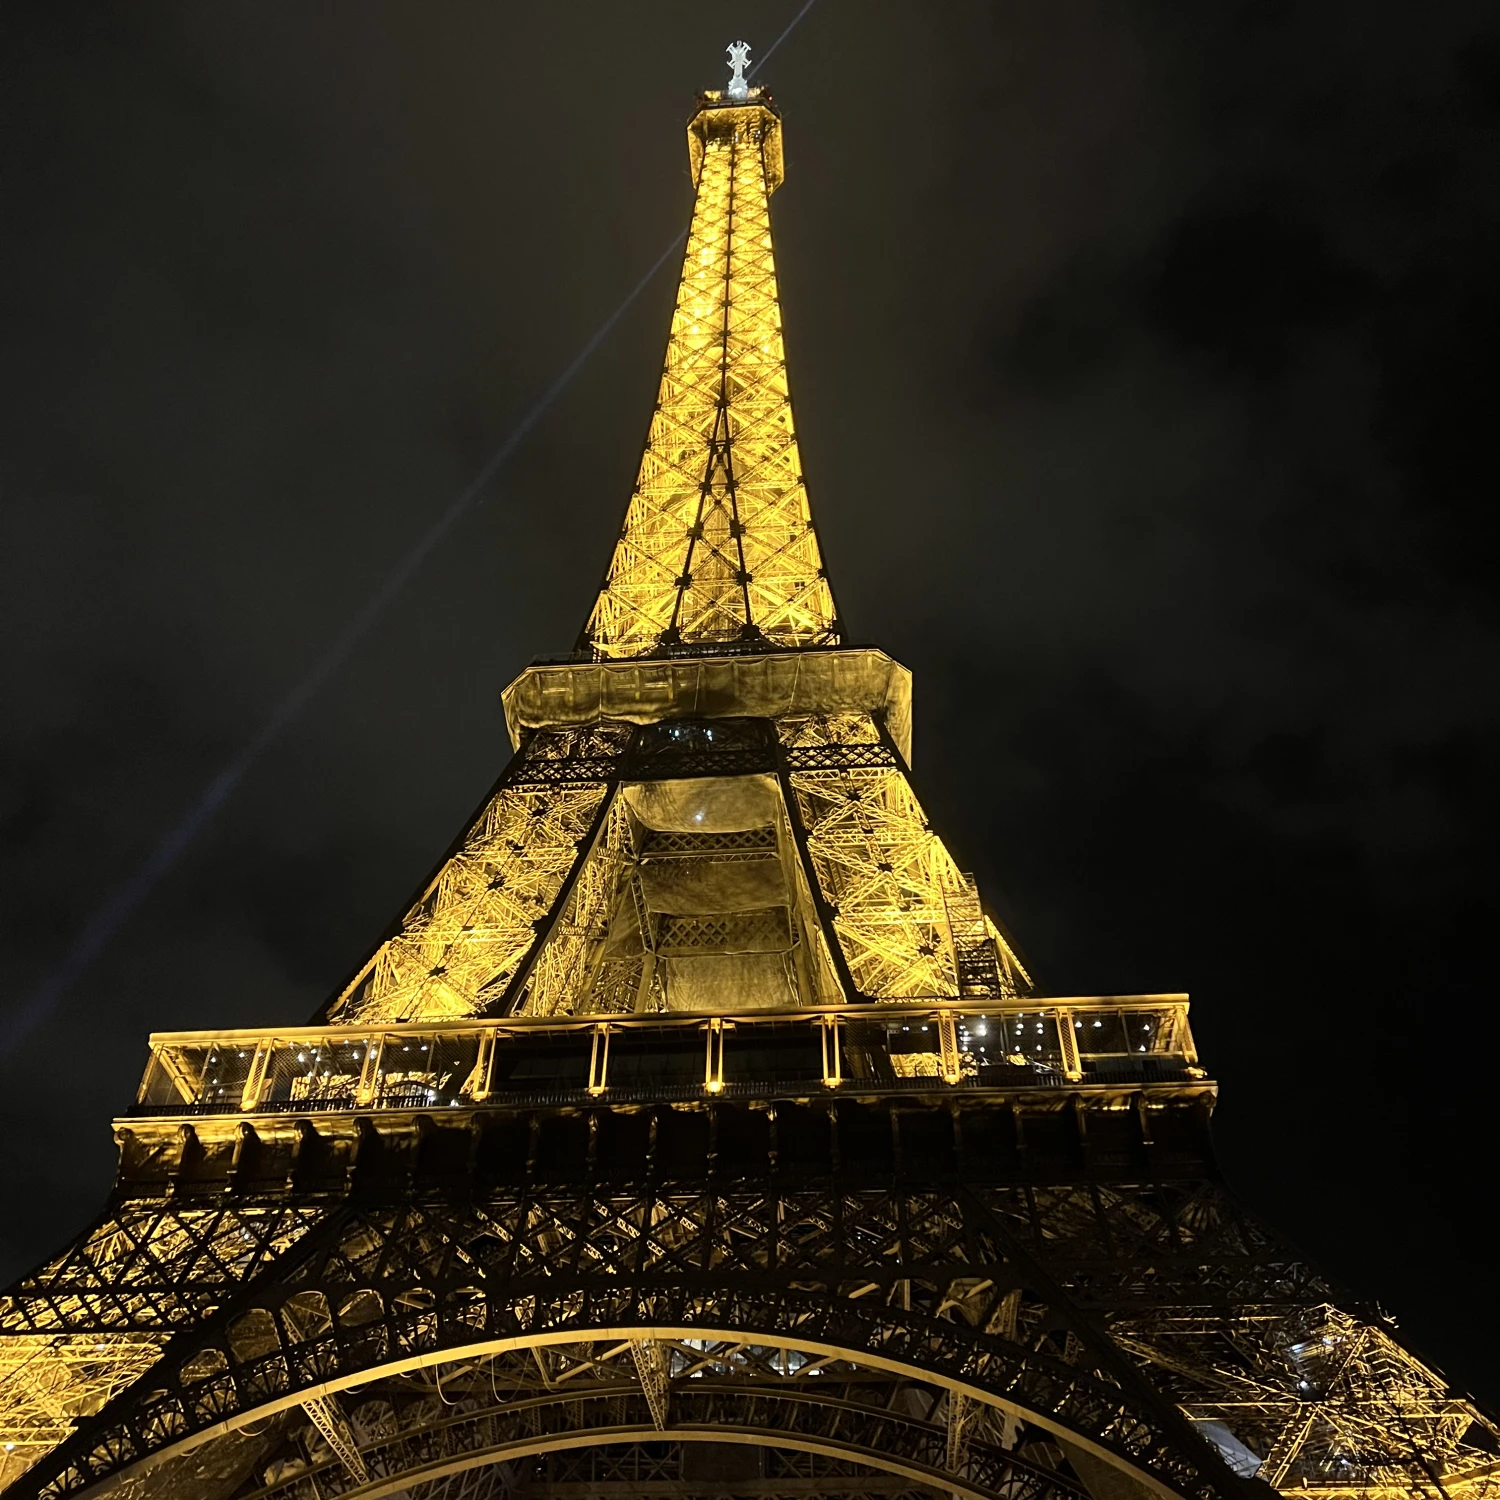 Night view of the Eiffel Tower